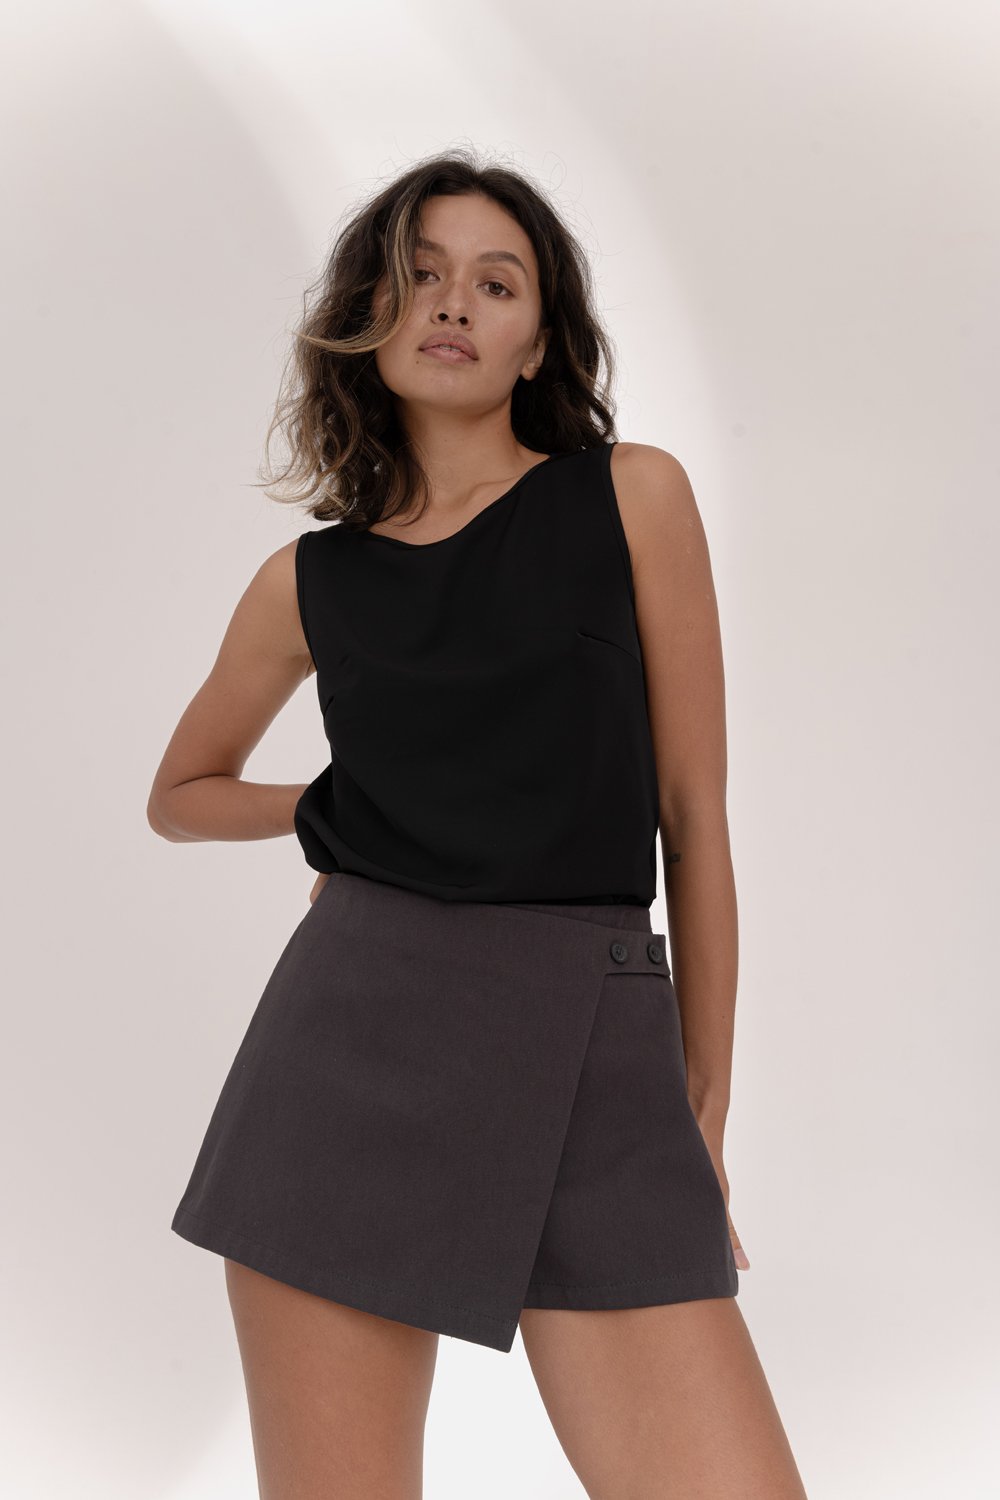 Cotton shorts-skirt in graphite color.